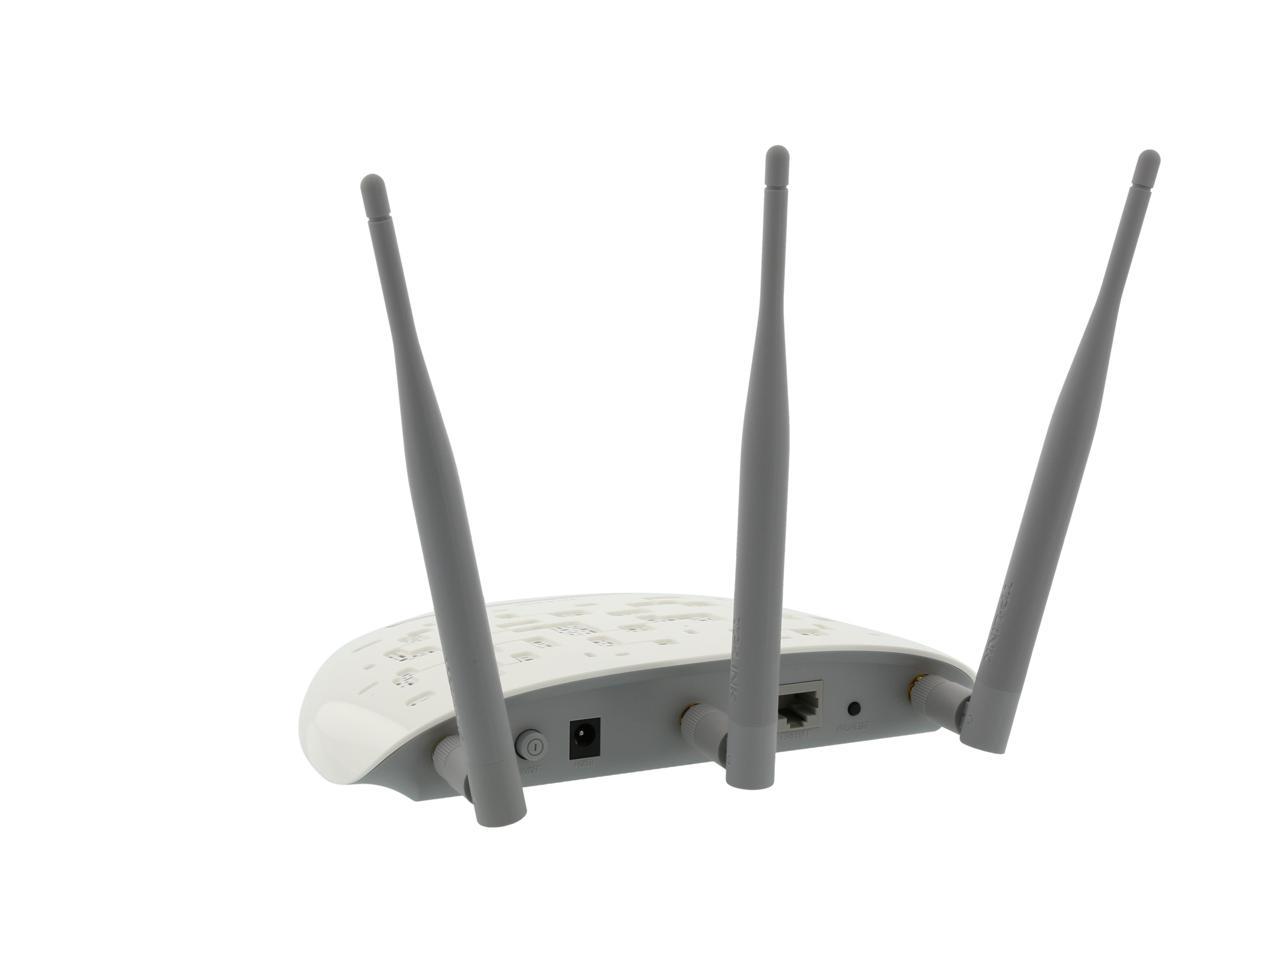 Multifunction TP-LINK TL-WA901ND Wireless N300 Access Point Multiple 300Mbps 